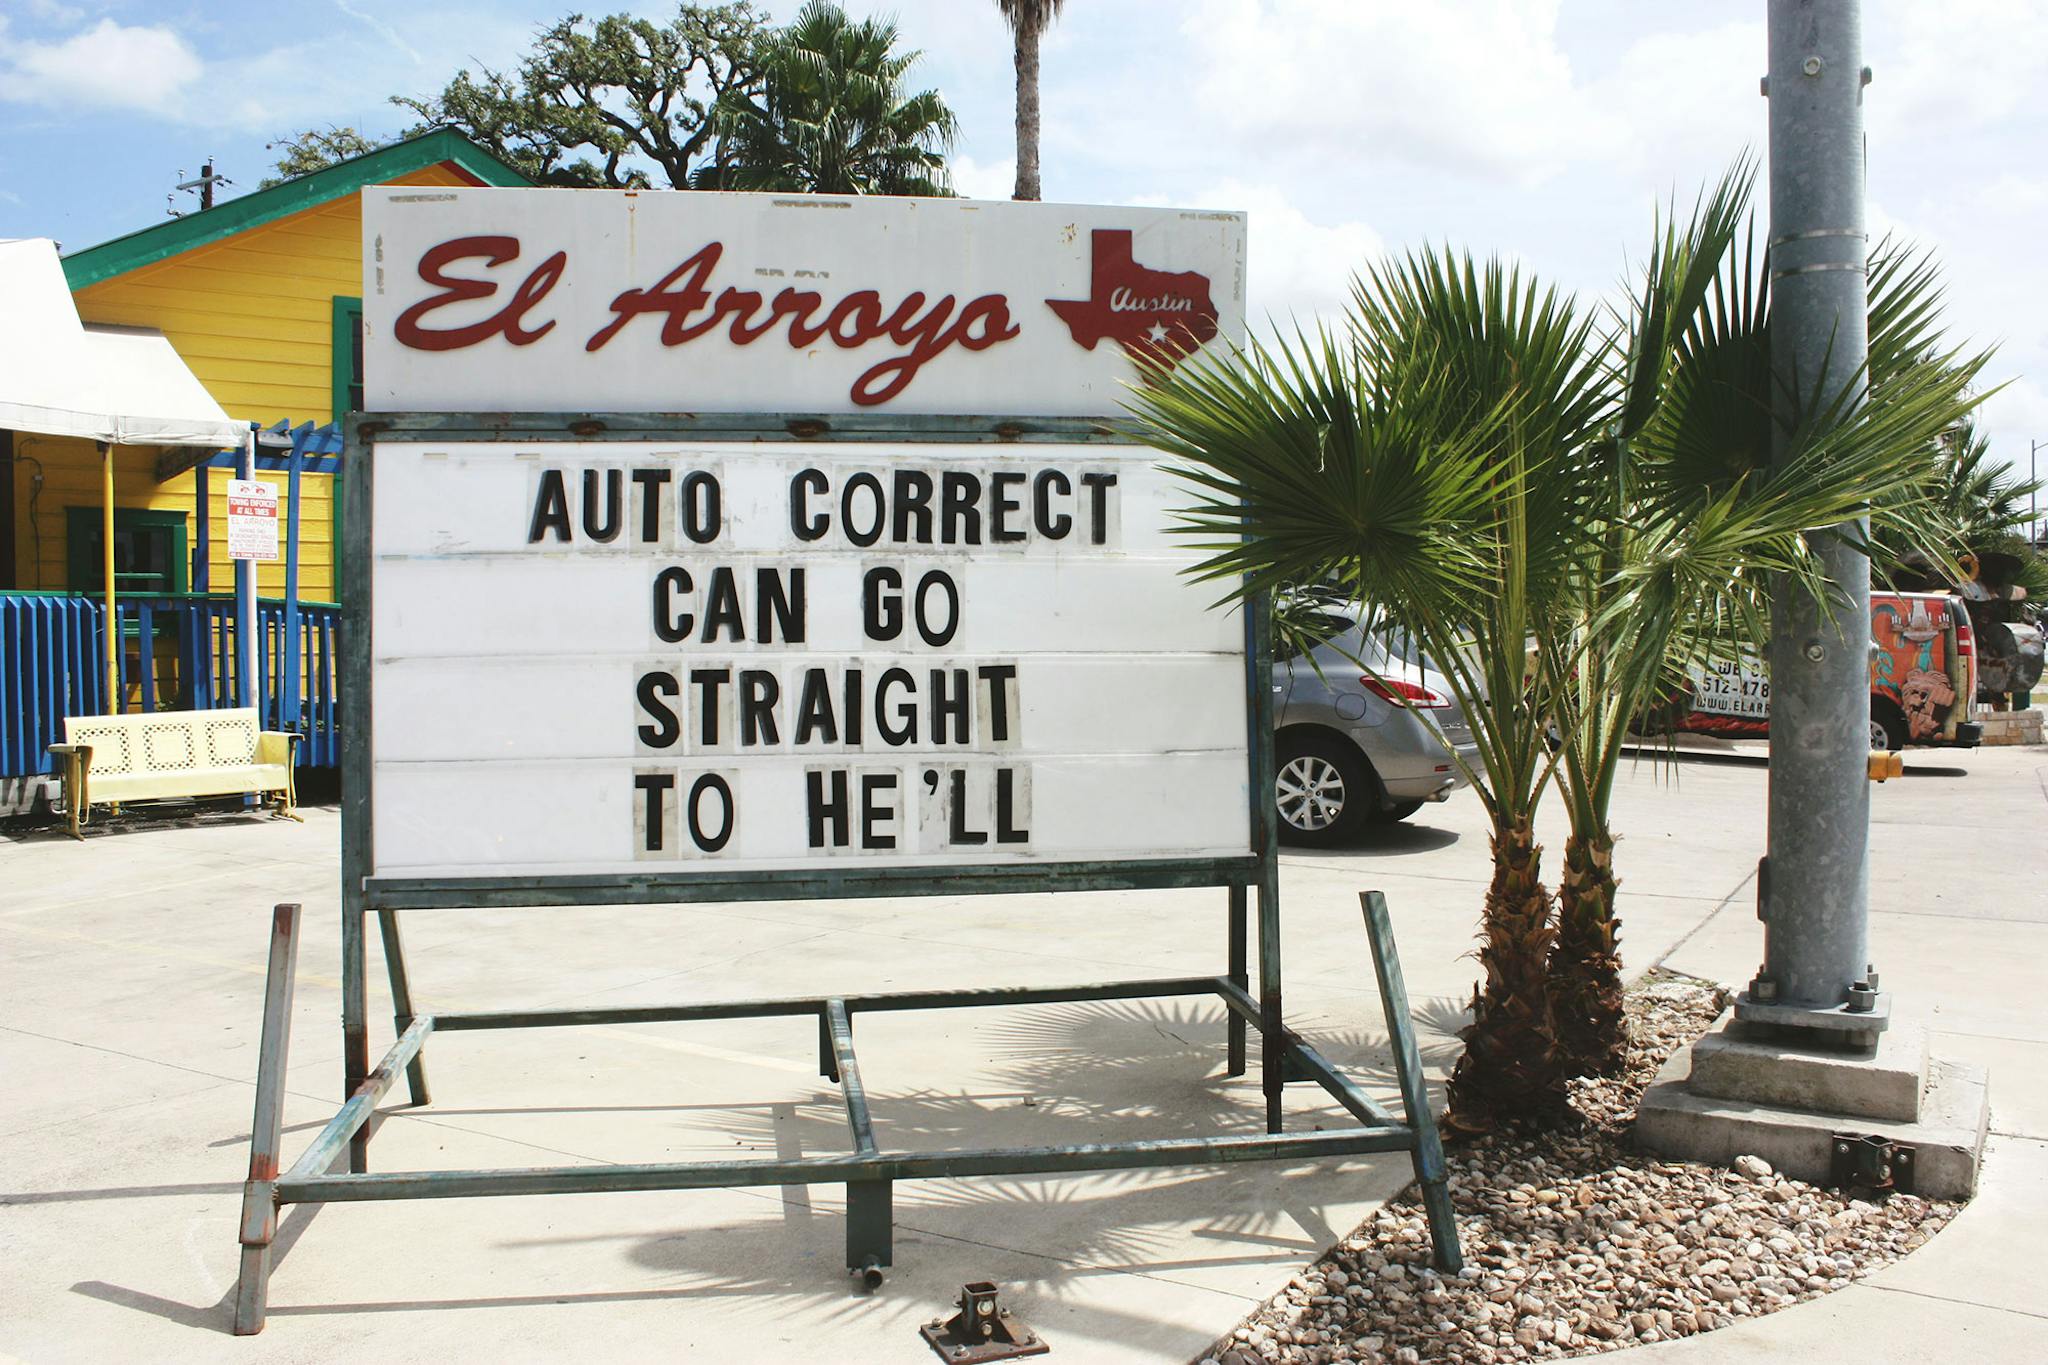 El Arroyo sign says autocorrect can go straight to he'll.